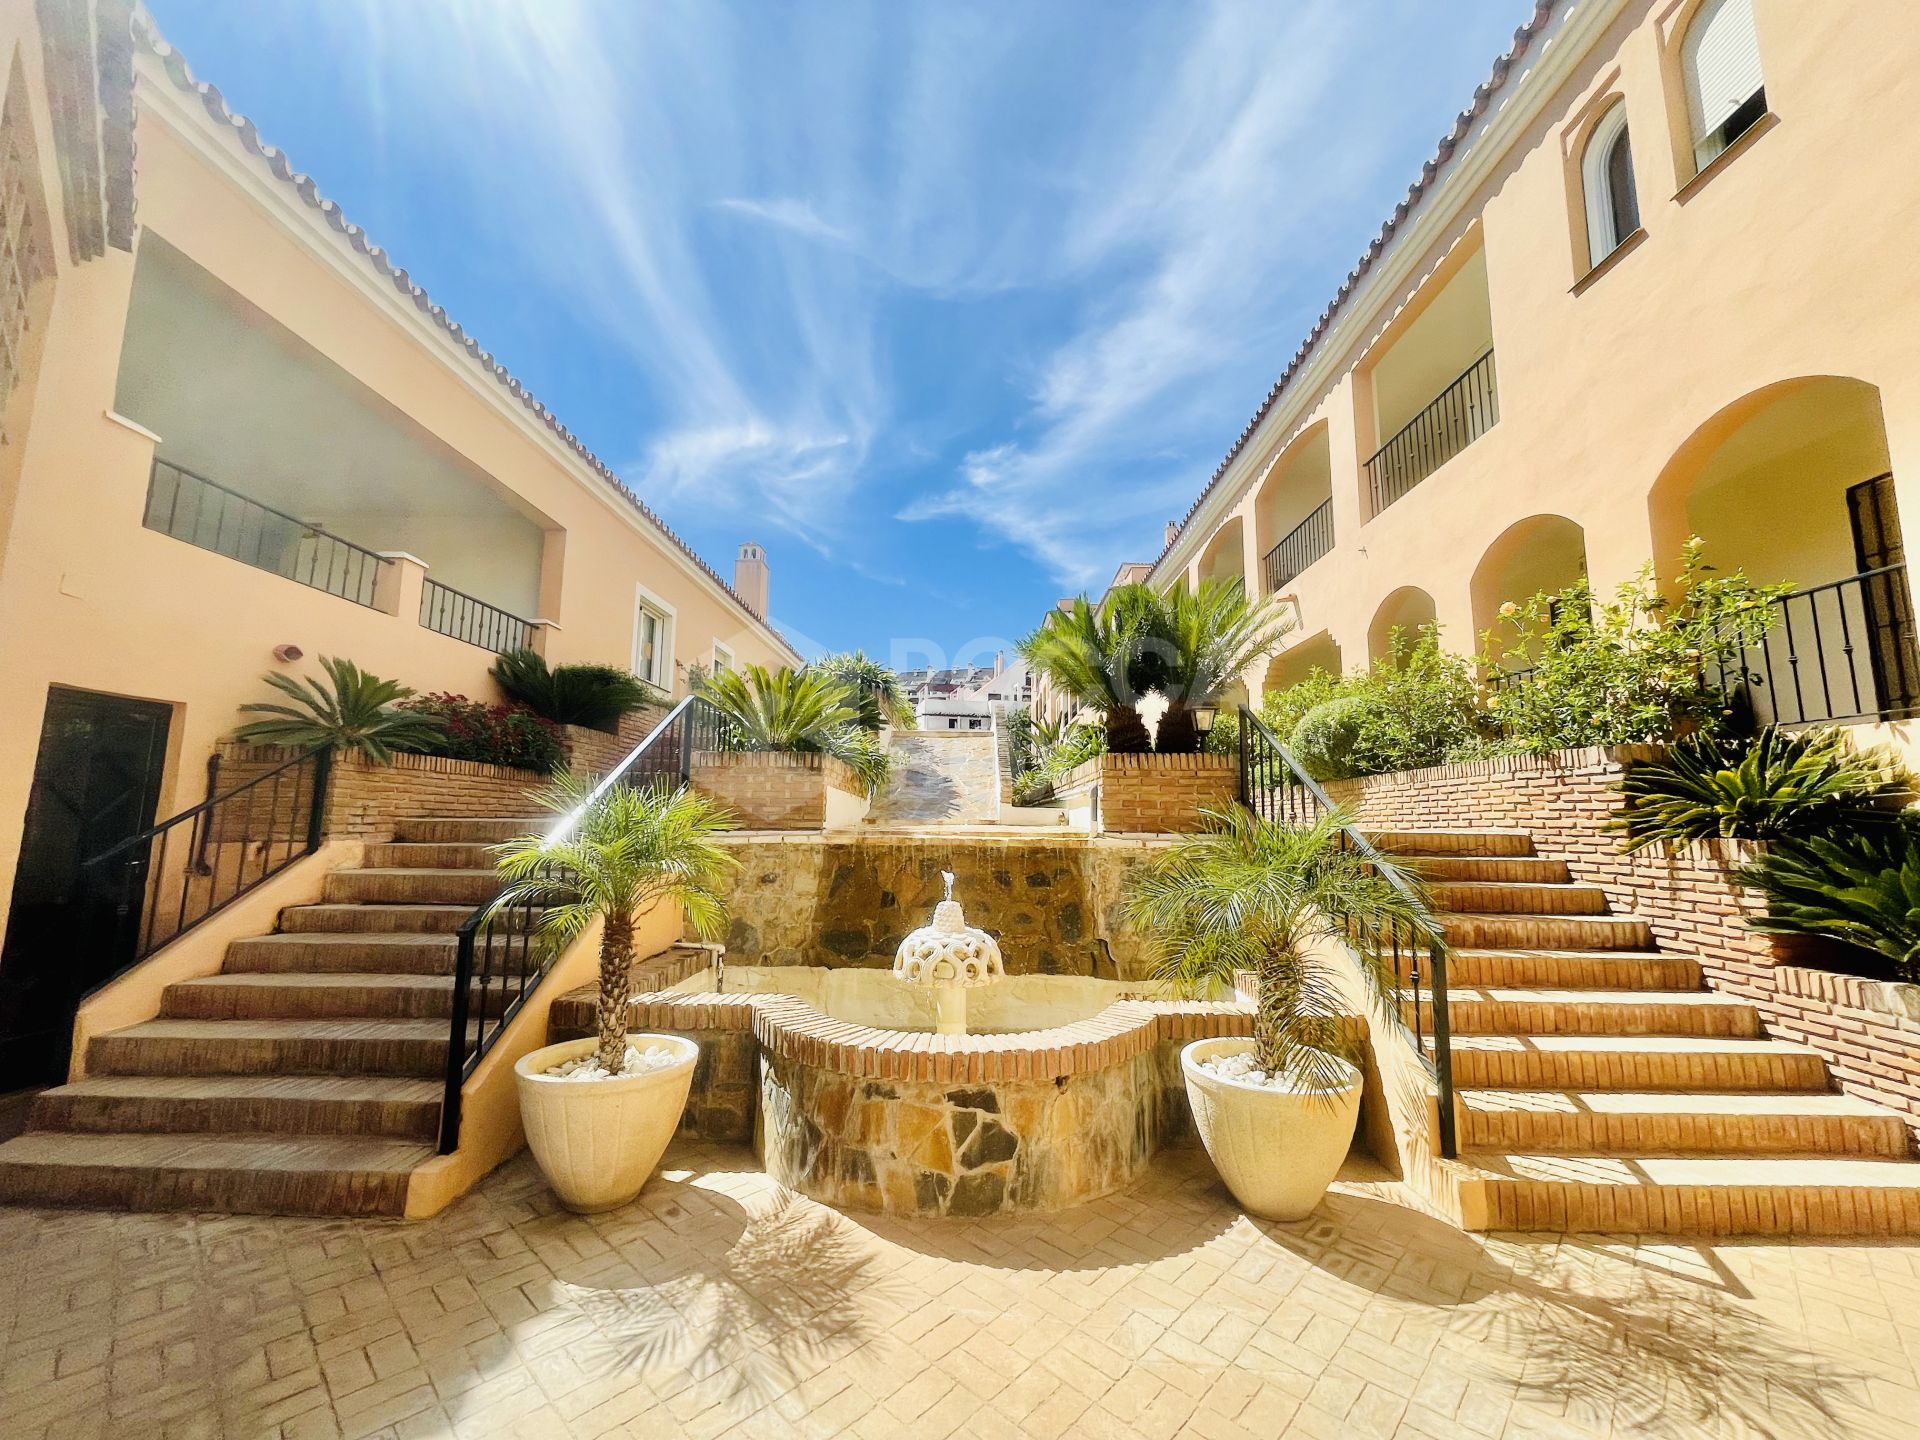 3 BED APARTMENT, WALKING DISTANCE TO CENTRO PLAZA & PUERTO BANUS.